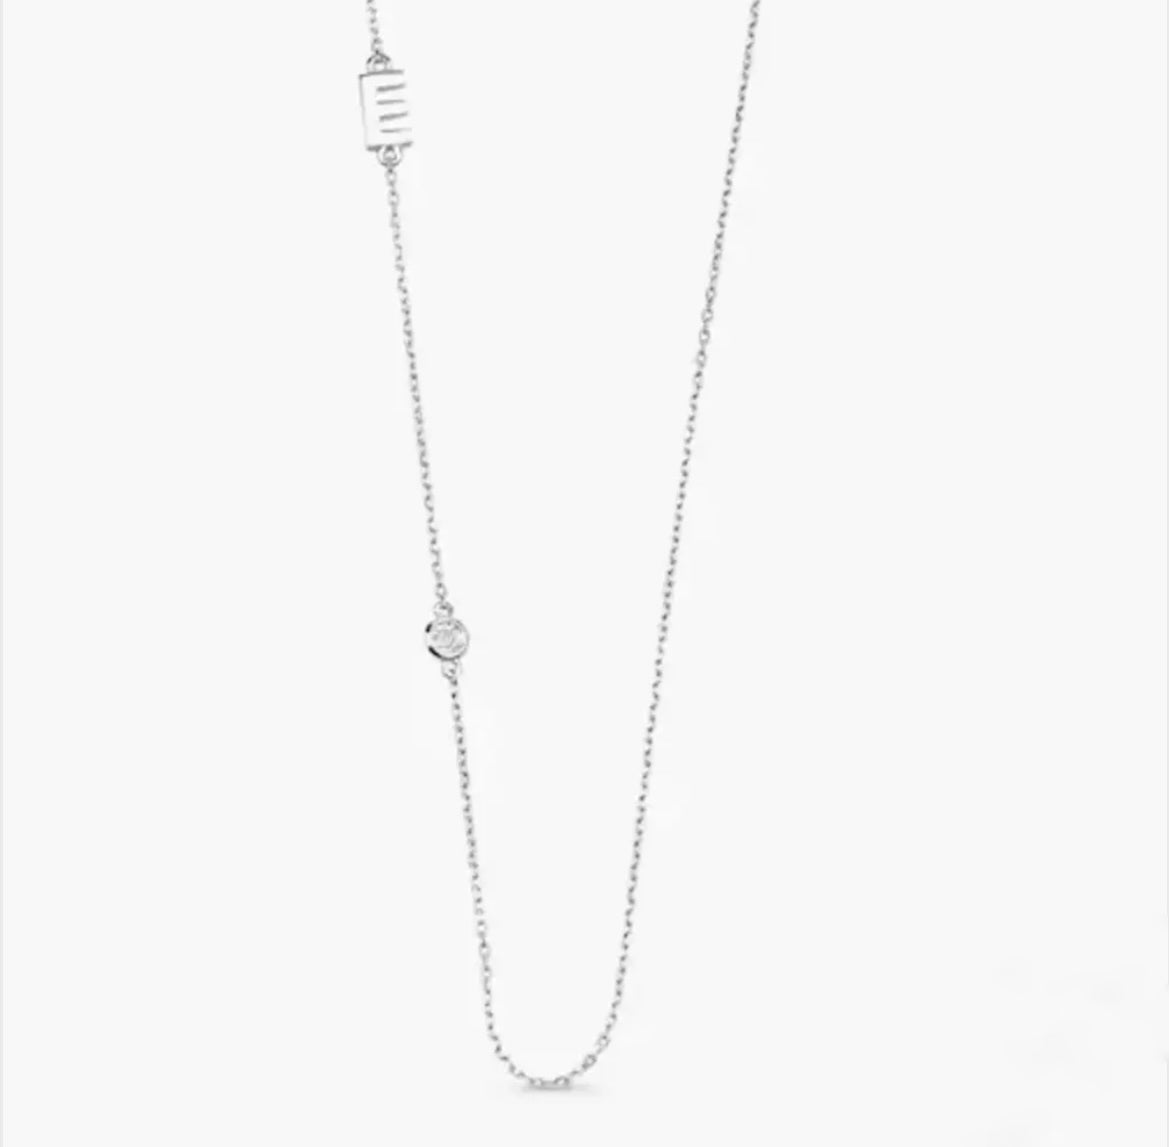 Mini Silver Letter F Necklace | Hersey & Son Silversmiths